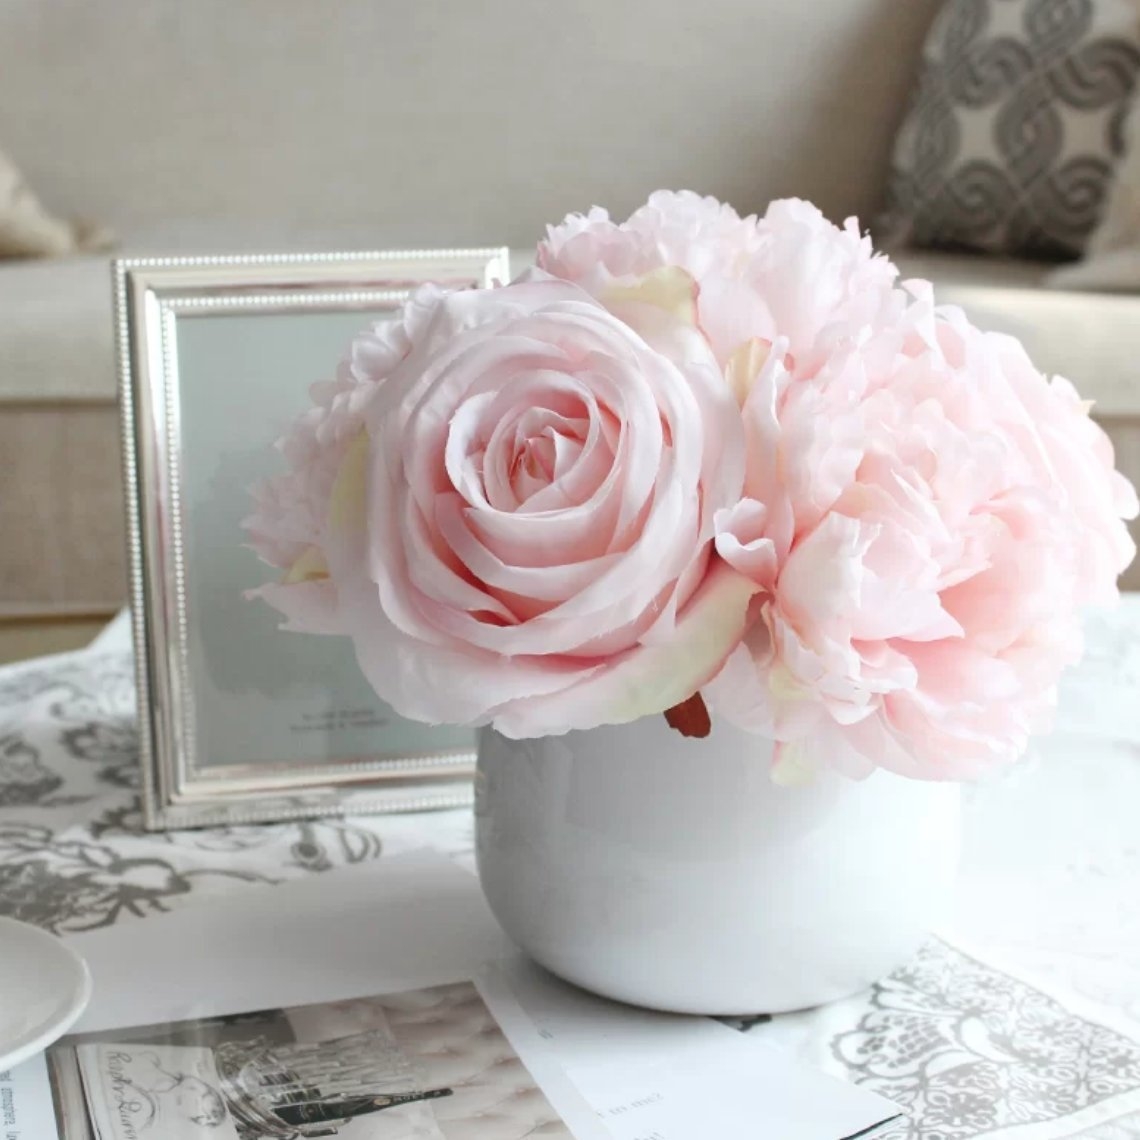 Peonies and Roses Floral Arrangement in Decorative Vase (faux) - Image 0